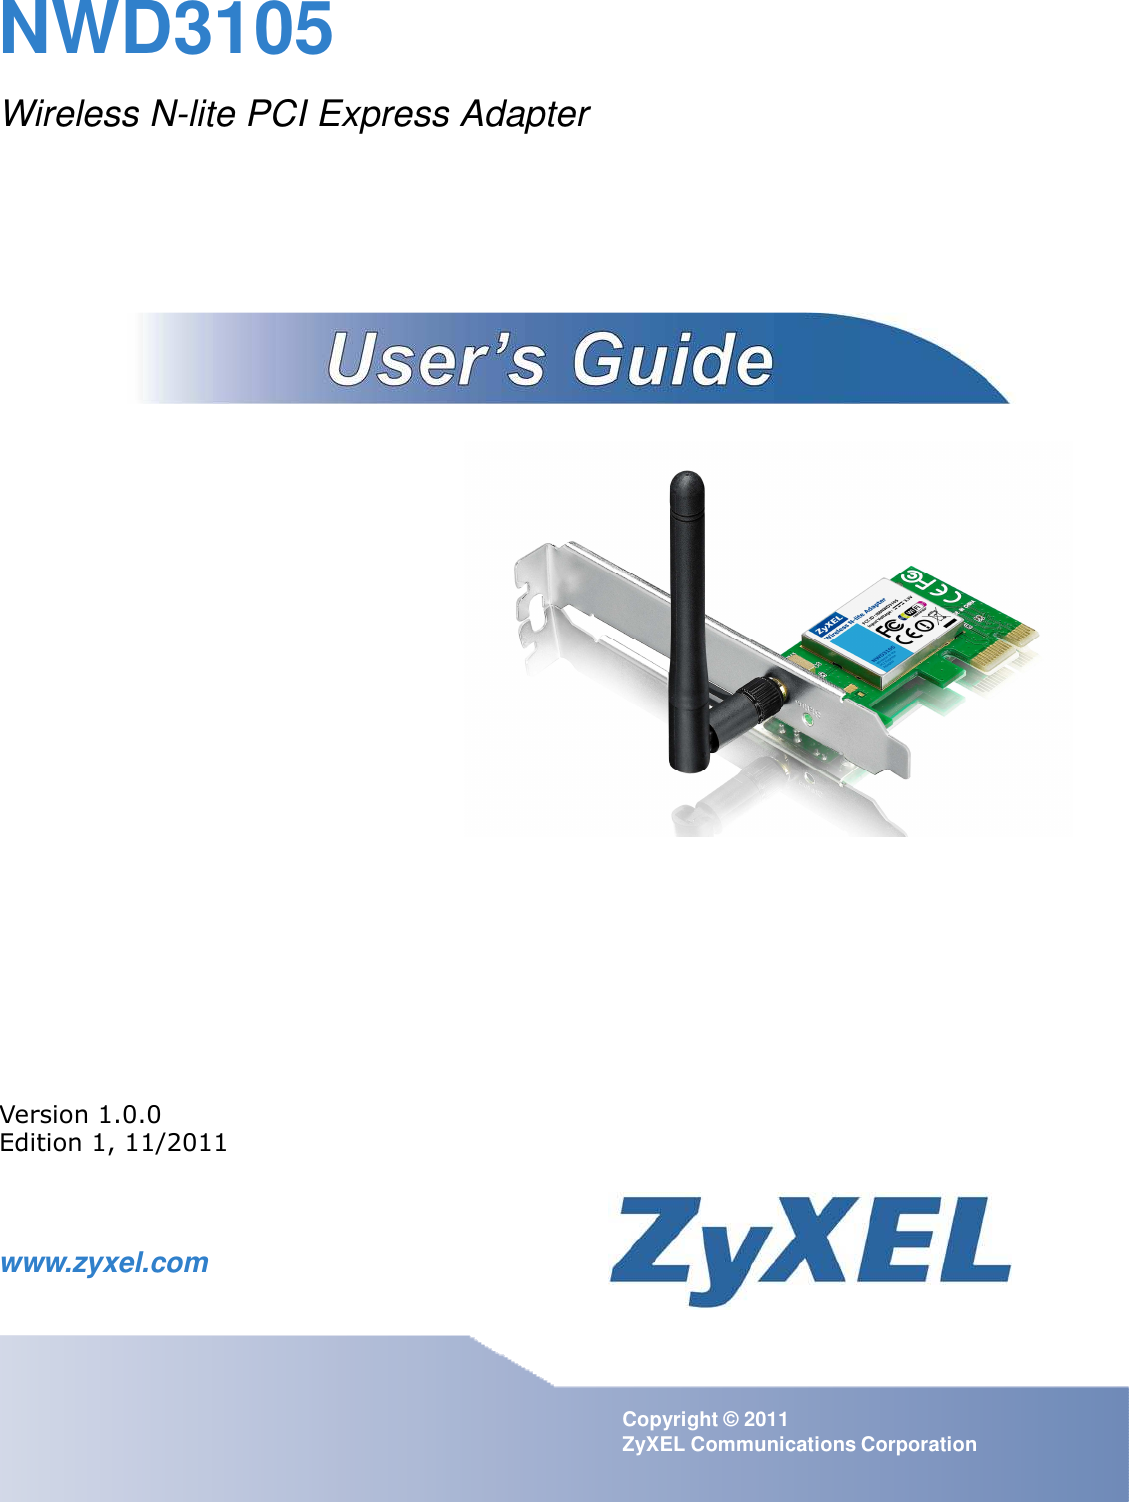  NWD3105  Wireless N-lite PCI Express Adapter                                      Default Login Details          Version 1.0.0 Edition 1, 11/2011     www.zyxel.com                                         Copyright © 2011 ZyXEL Communications Corporation 